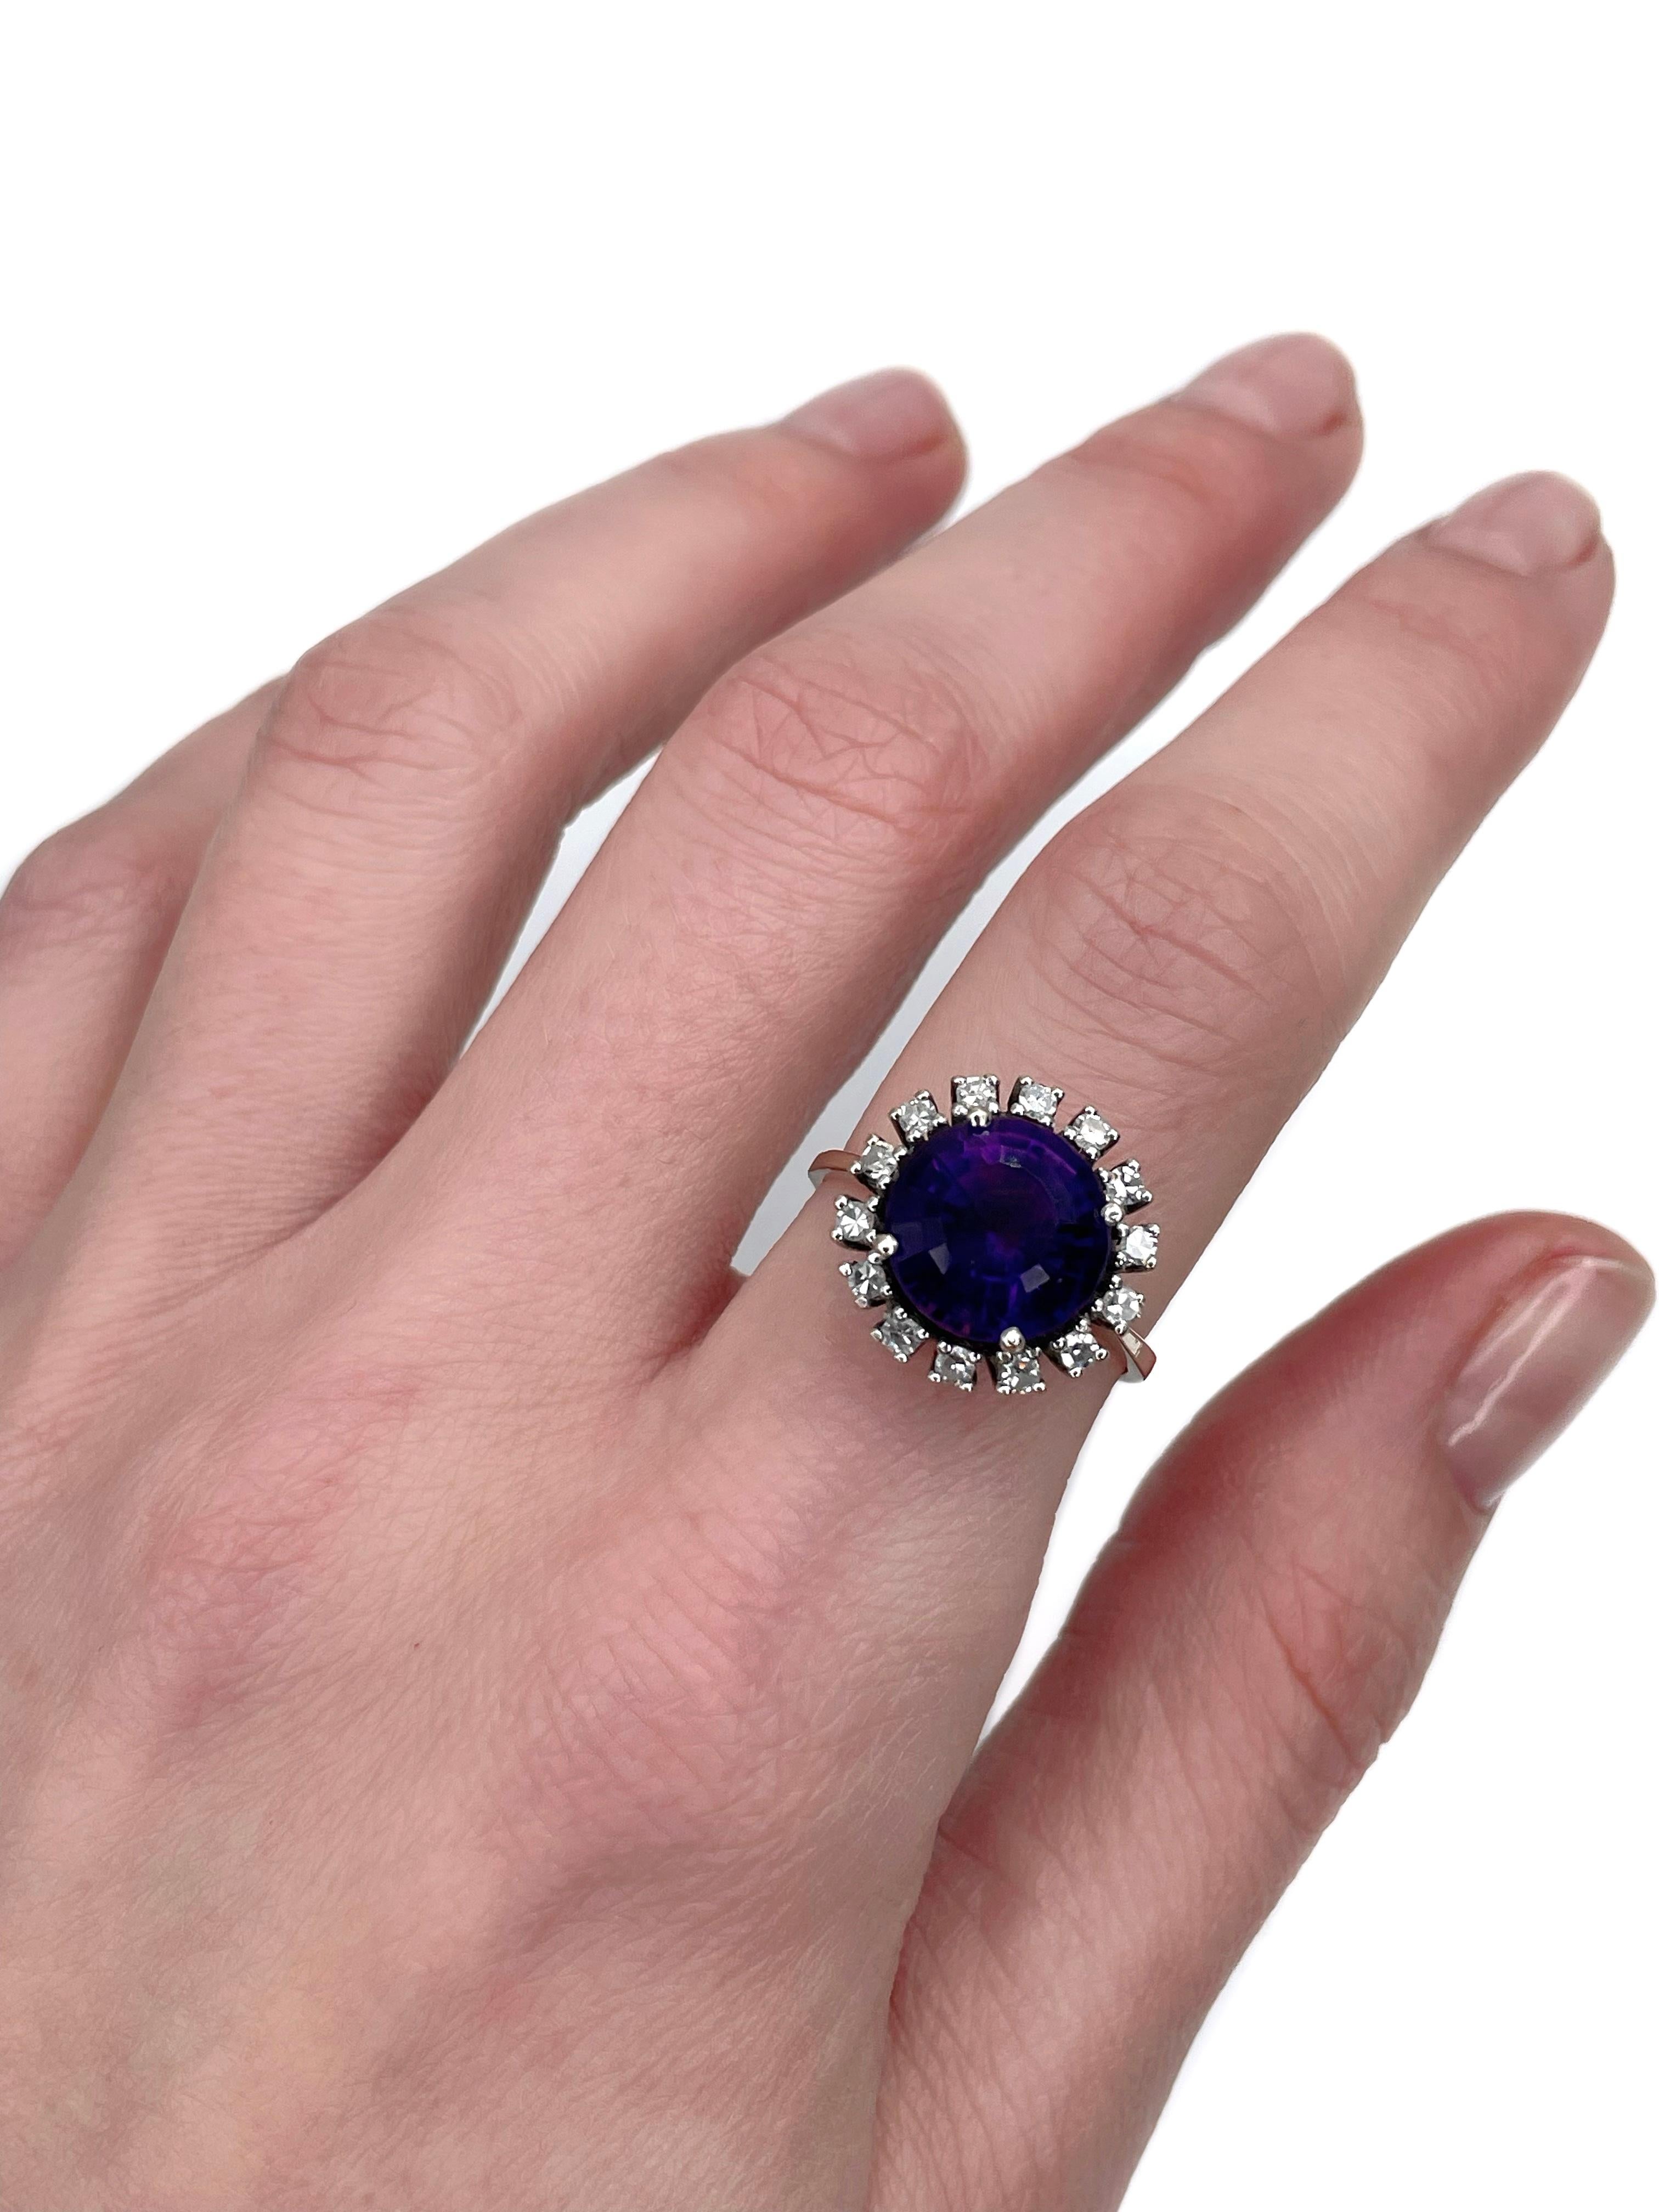 This is a vintage cluster ring crafted in 14K white gold. Circa 1980.

It features:
- 1 amethyst, round cut, 3.80ct, P 6/4, P1
- 14 diamonds, RBC-17, TW 0.30ct, RW+/W, VS-SI

Weight: 4.79g
Size: 17.5 (US 7.25)

IMPORTANT: please ask about the